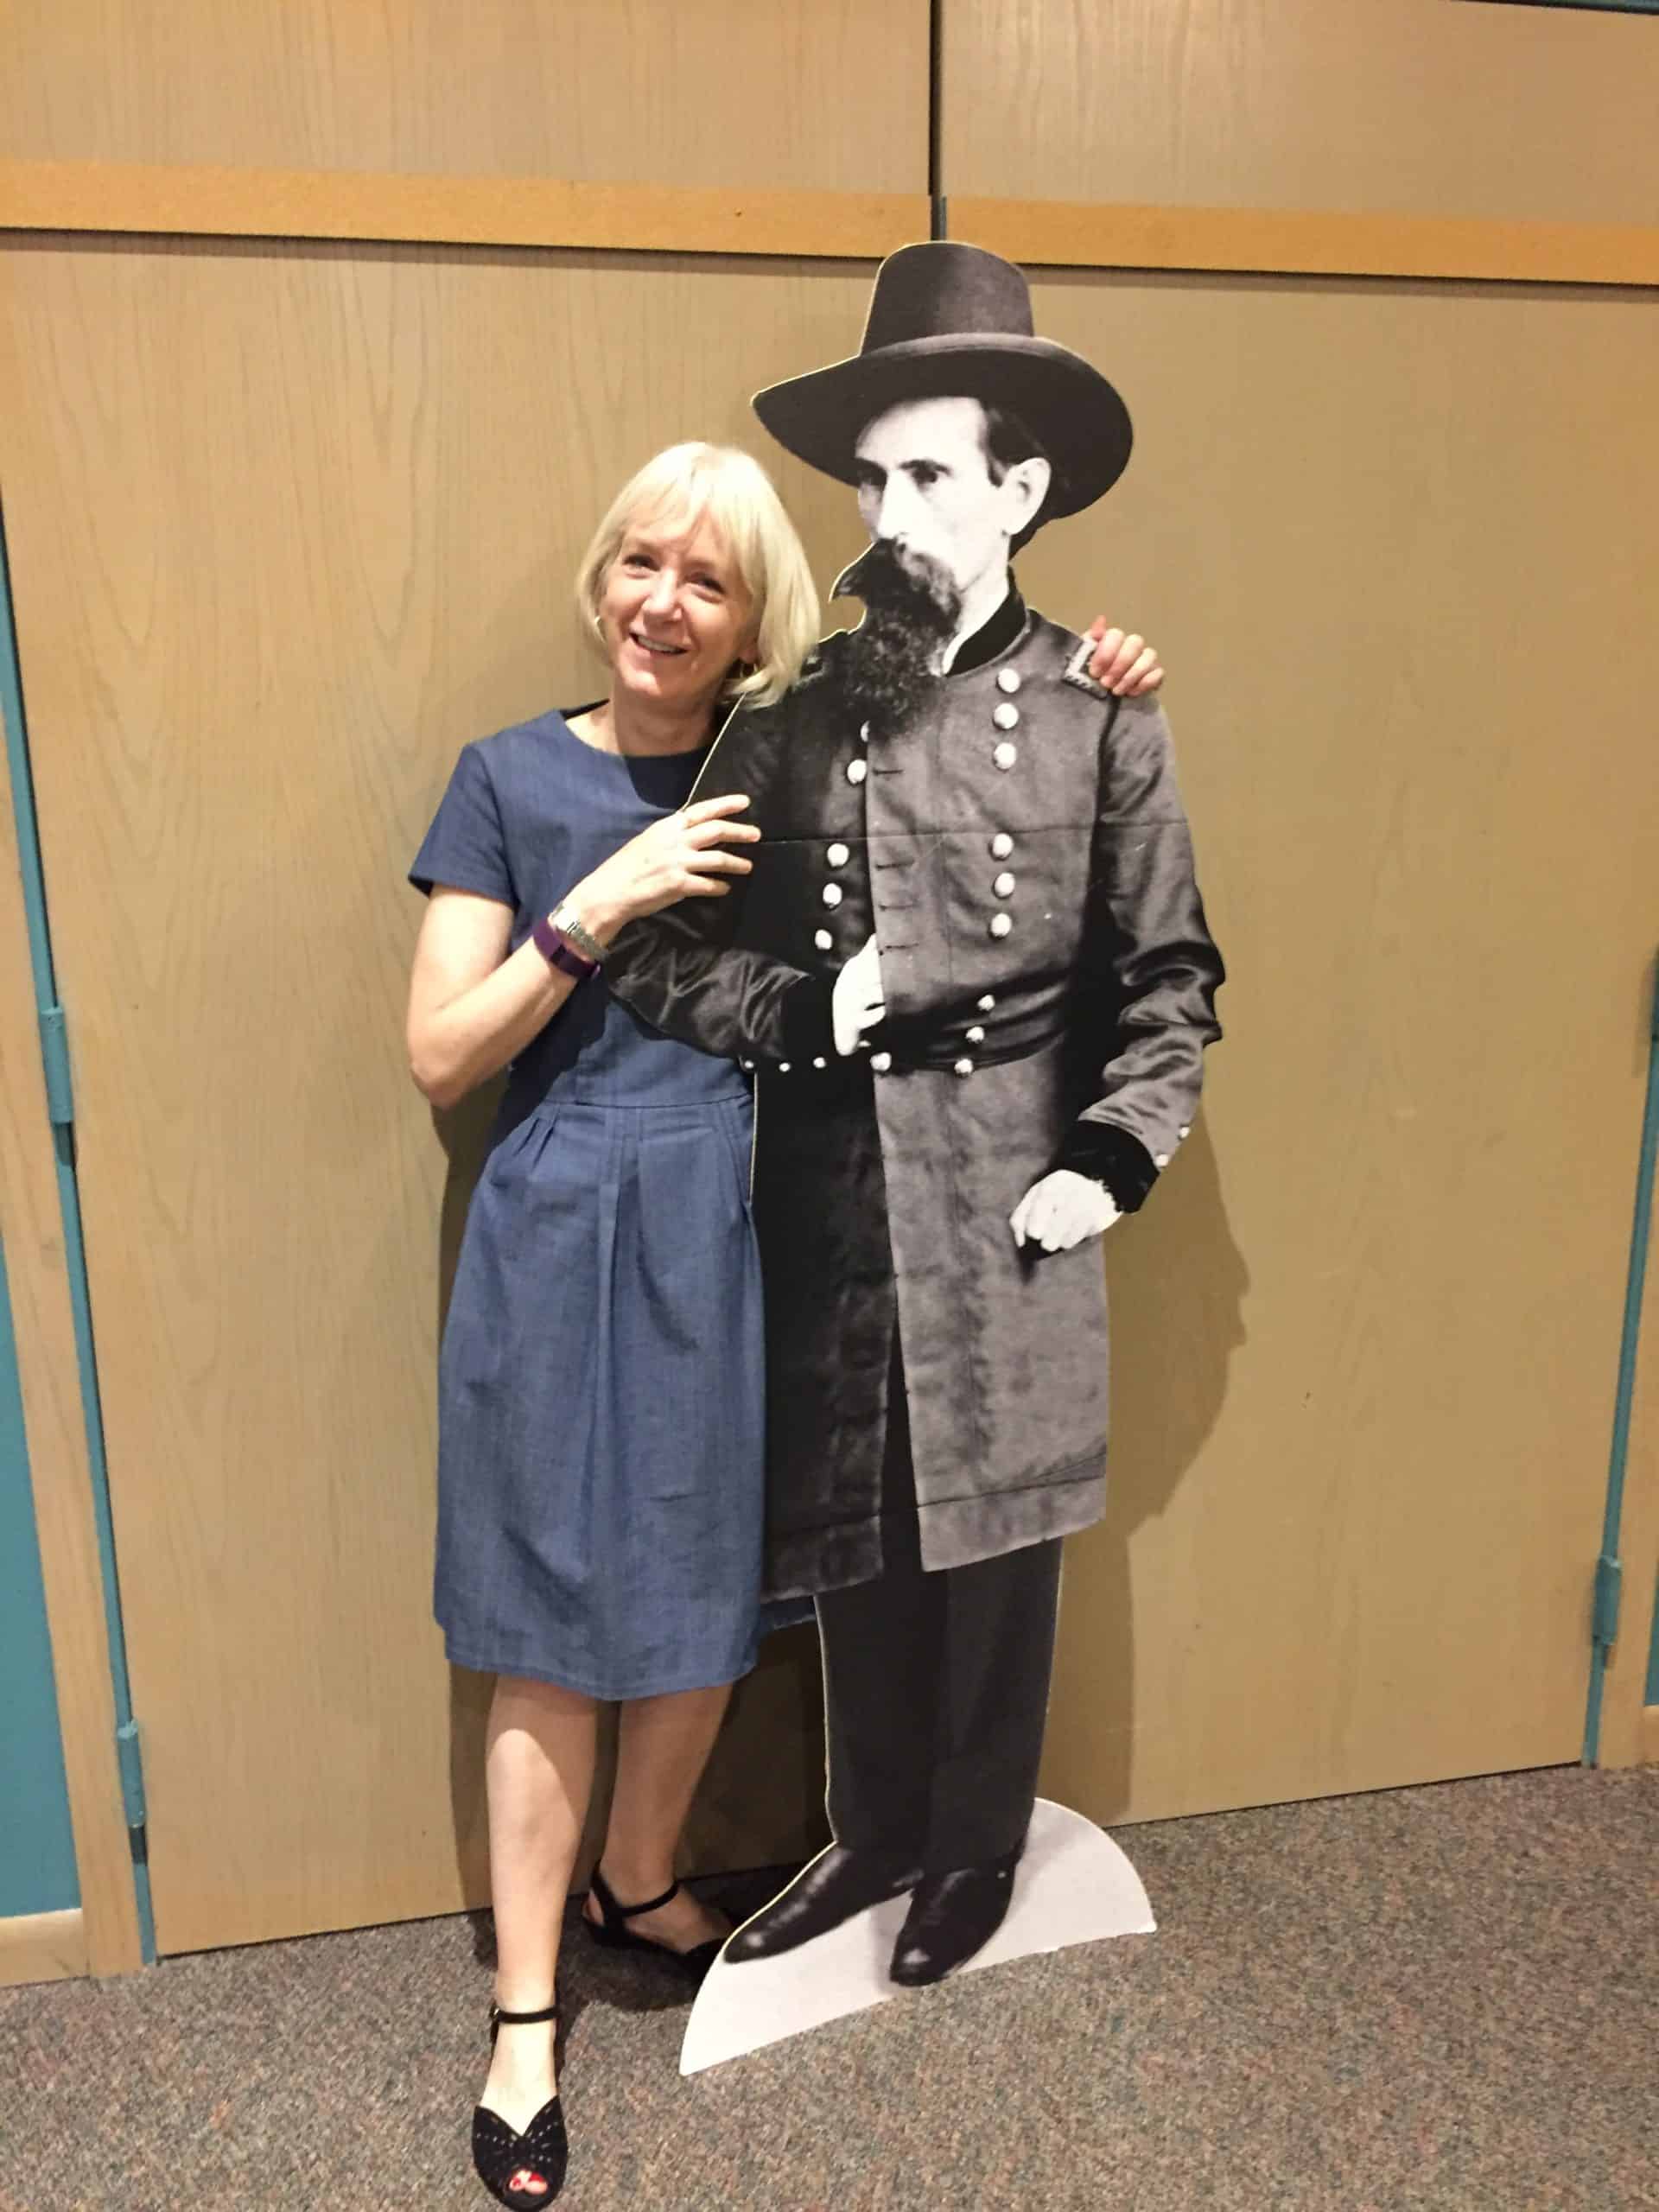 Carol Wallace, a blonde woman, stands next to a life-size cardboard cutout of her great-great-grandfather, Lew Wallace.